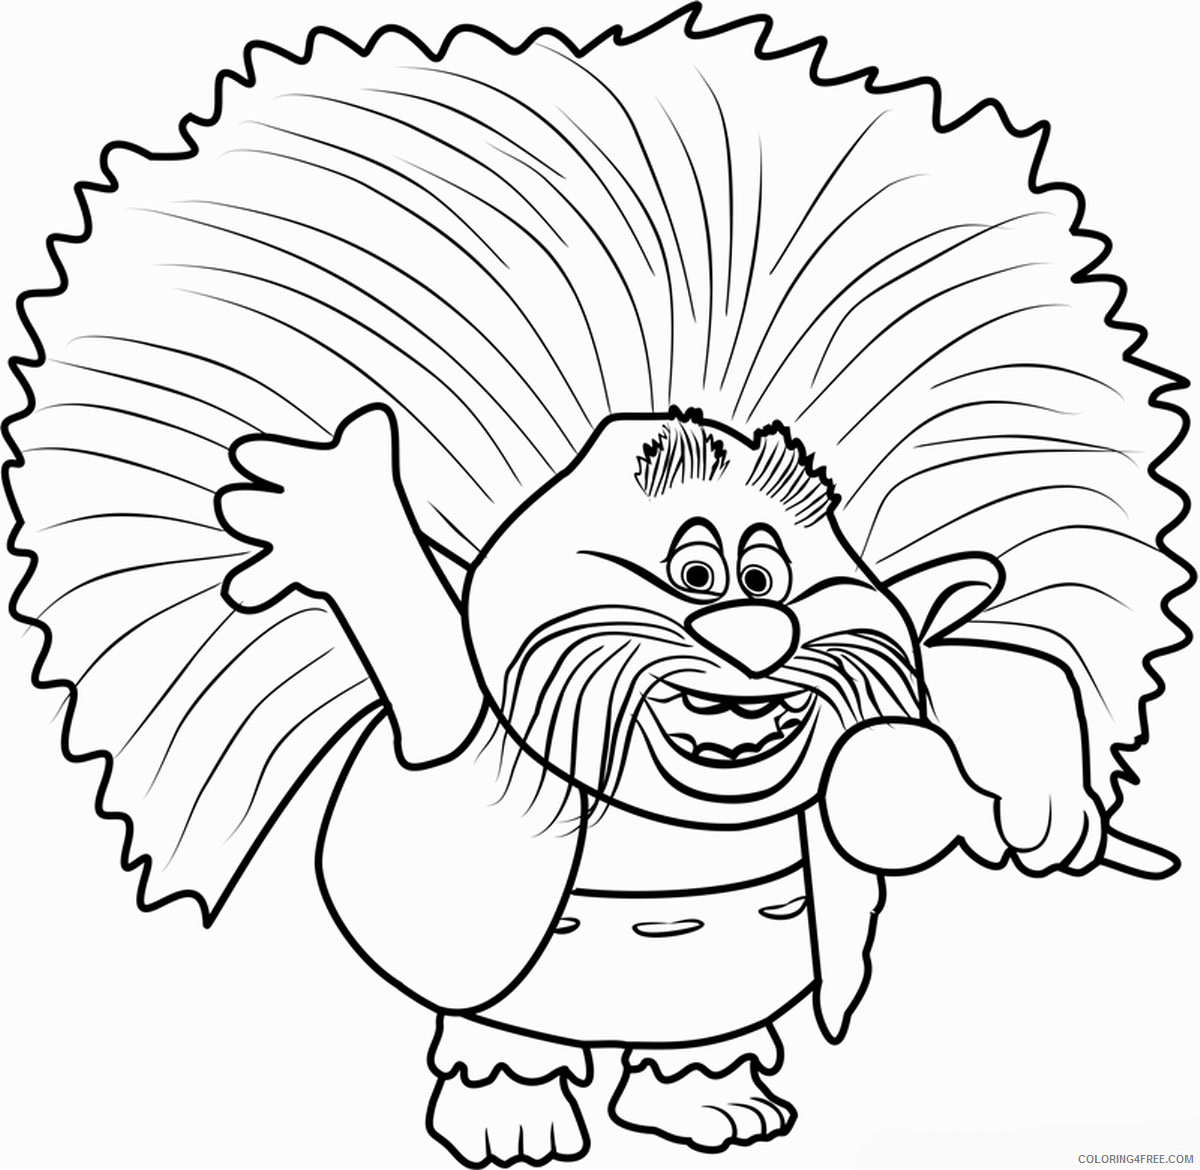 Trolls Coloring Pages TV Film trolls 4 Printable 2020 10817 Coloring4free